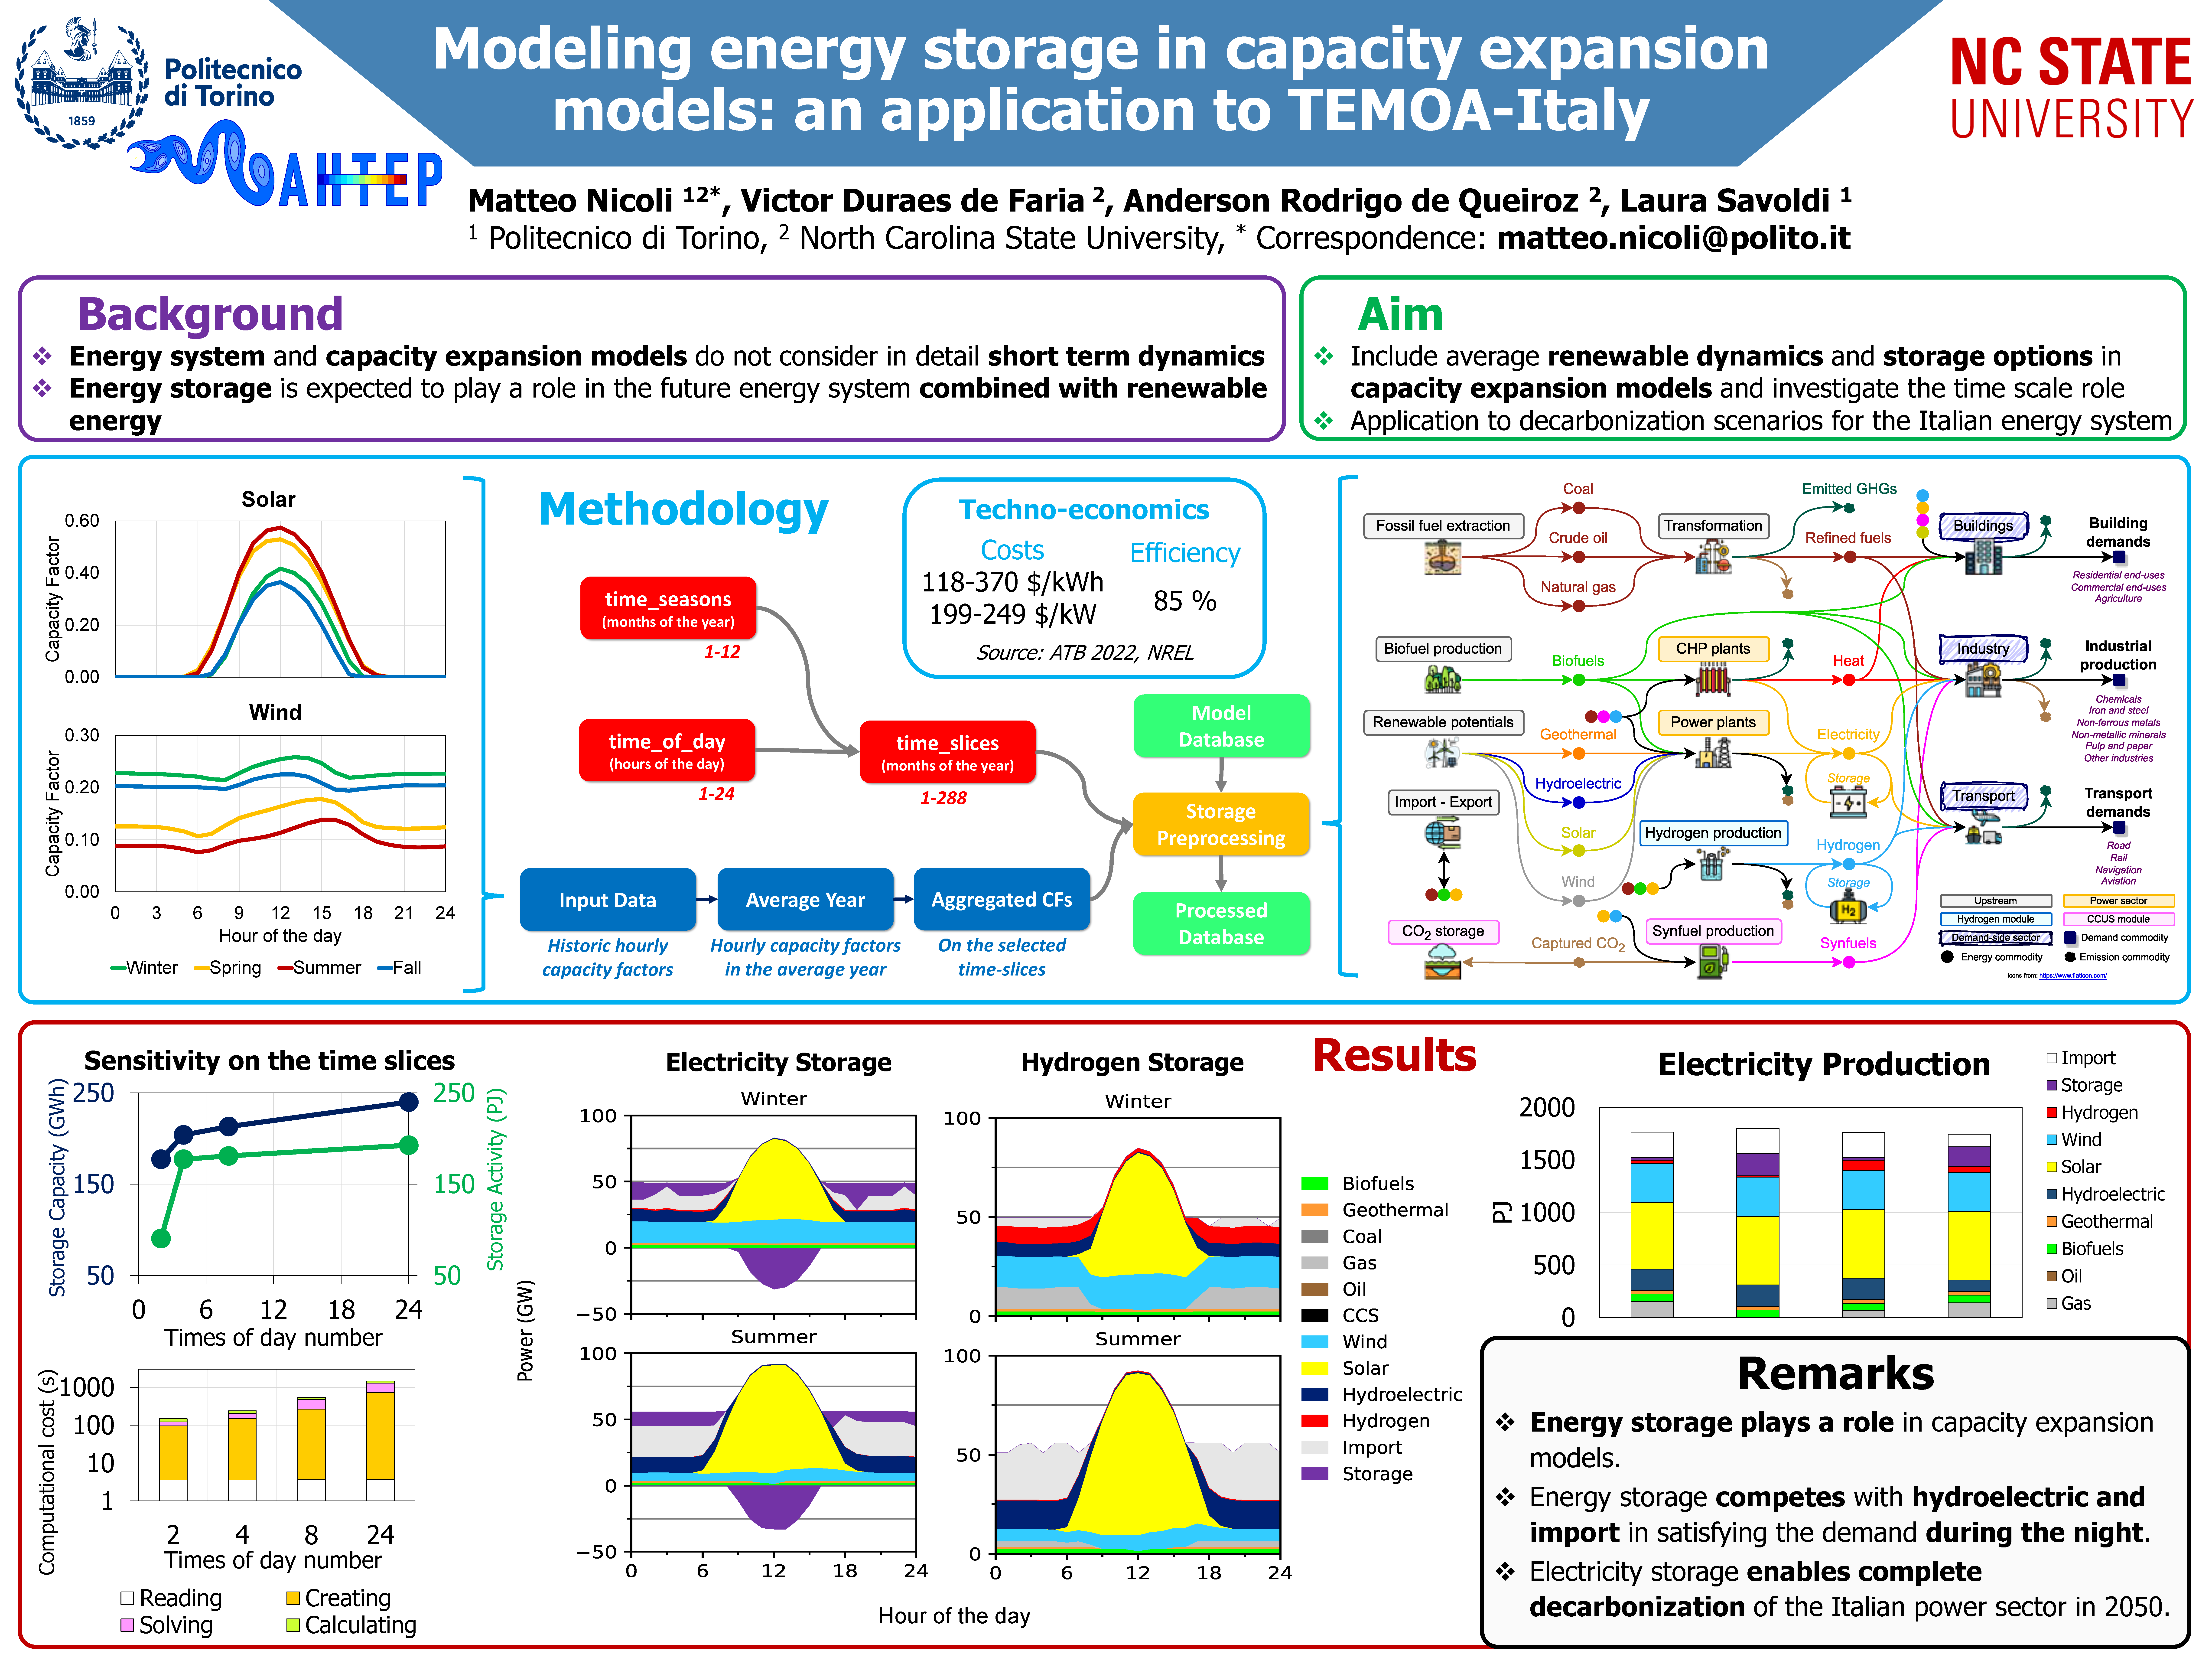 image of Matteo Nicoli's poster, "Modeling energy storage in capacity expansion models: an application to TEMOA - Italy"